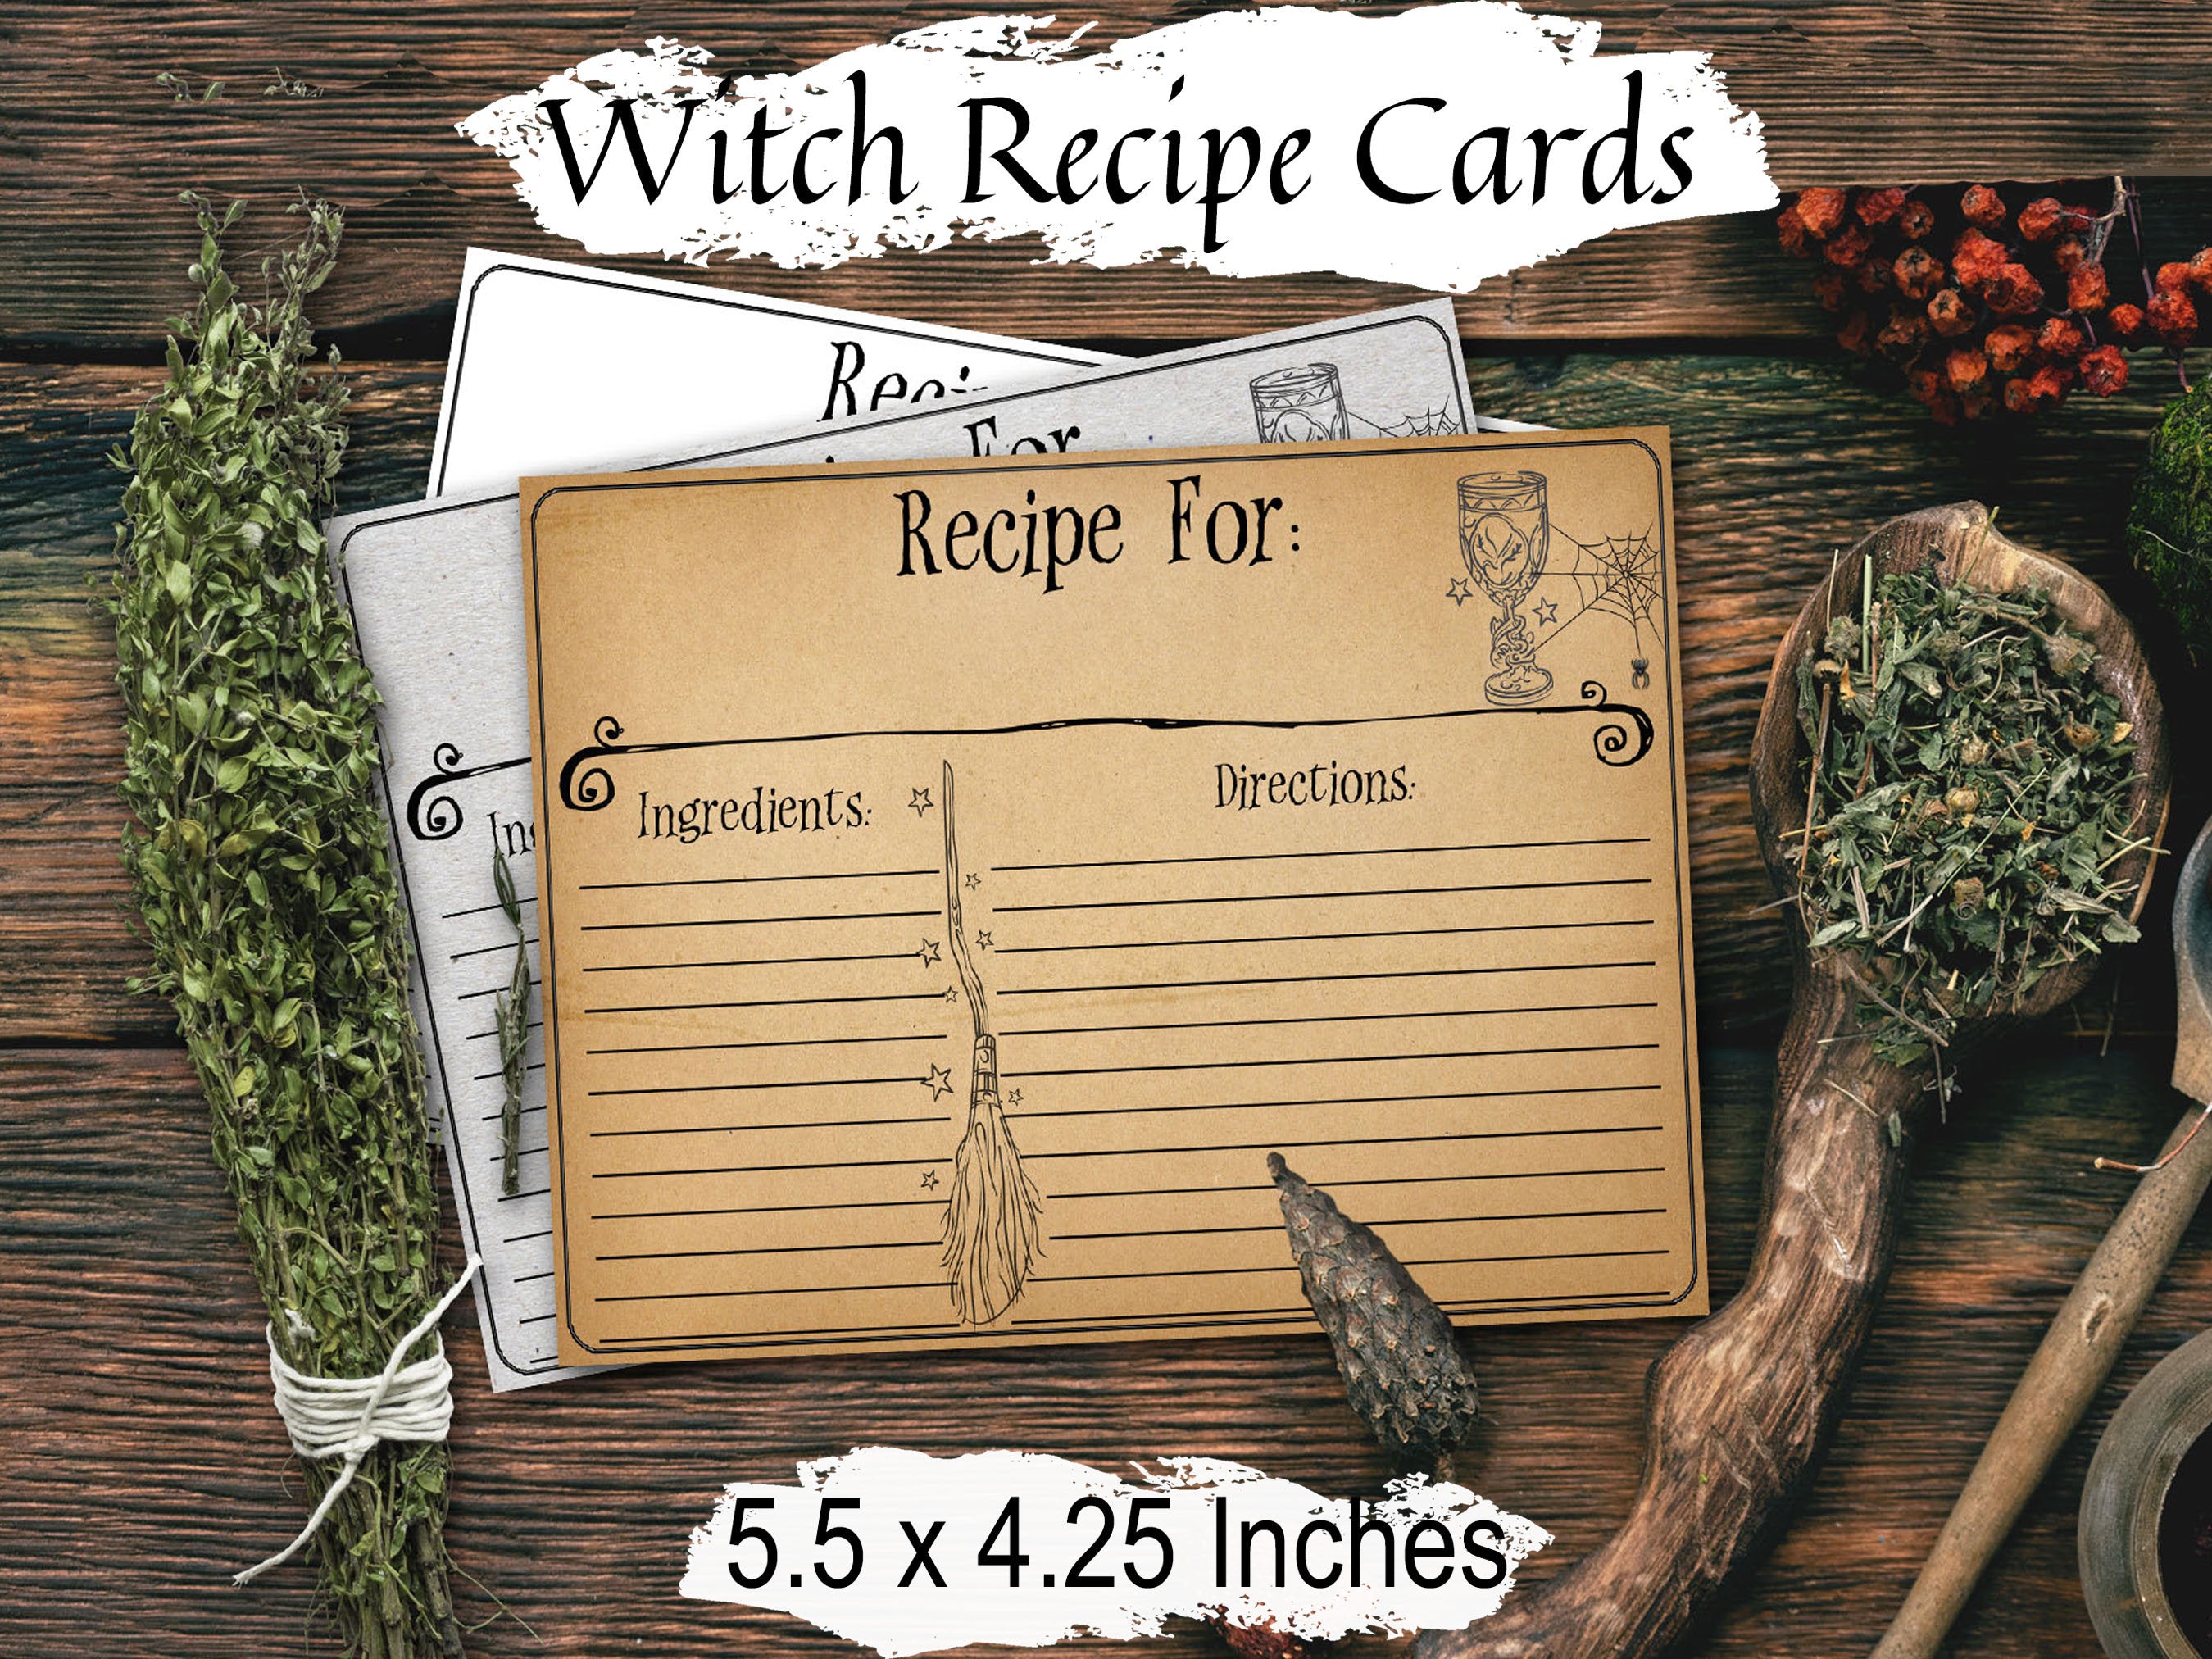 WITCH RECIPE CARDS, Kitchen Witch Spell Cards, Recipe Card Templates, Write Down your Spells, Wicca Witchcraft Magic diary Journal cards - Morgana Magick Spell